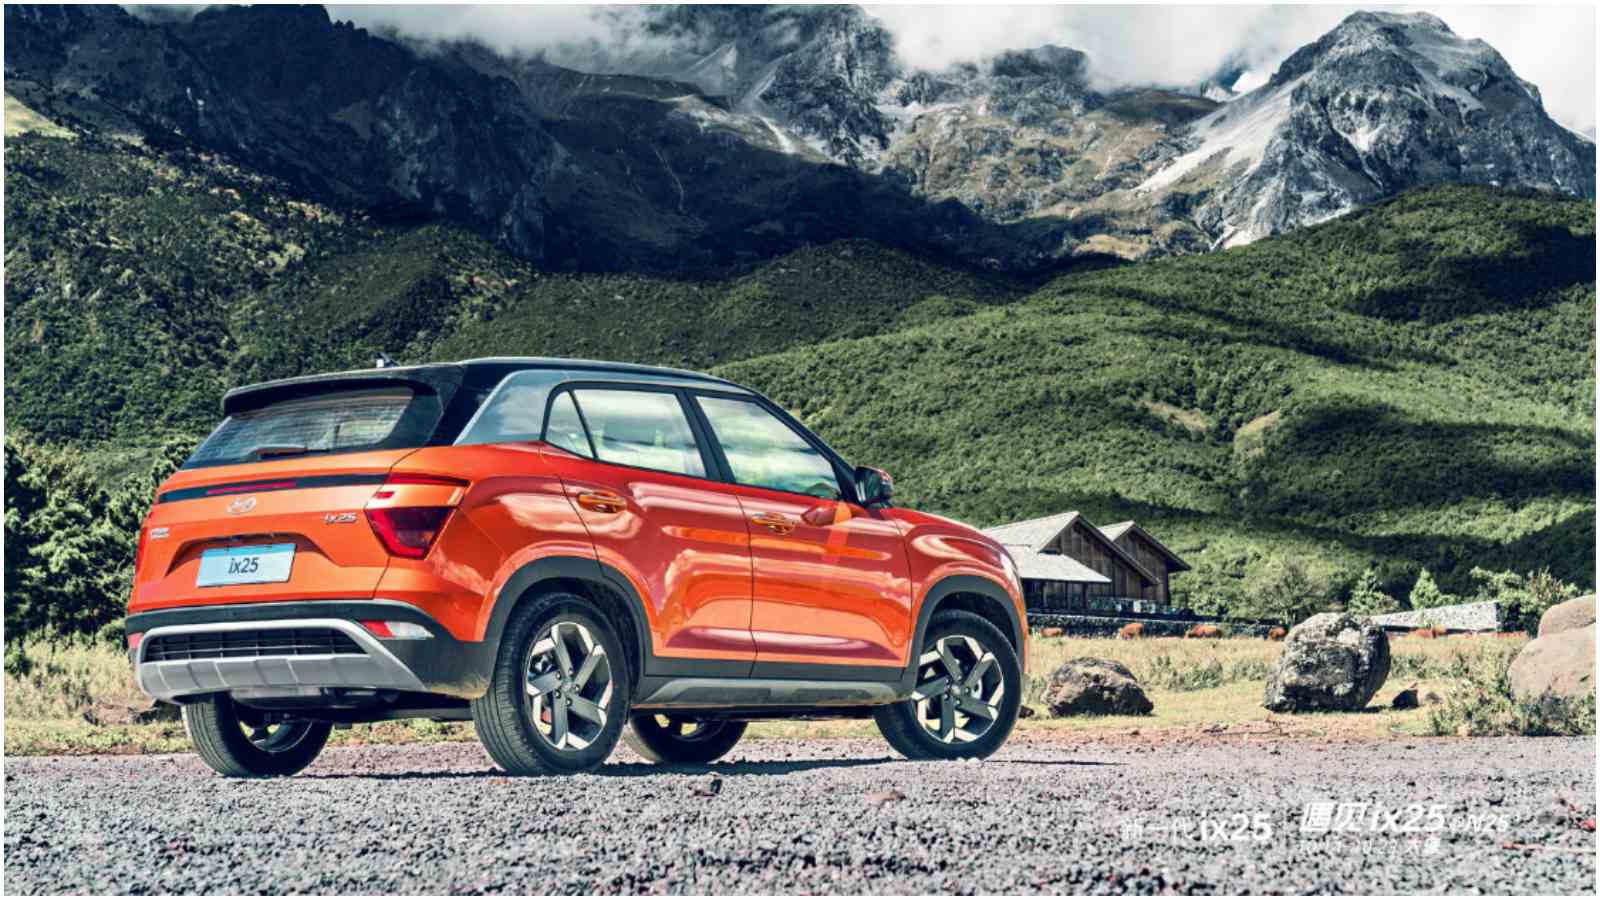 Check Out The Official Image Of The New Generation Hyundai Creta